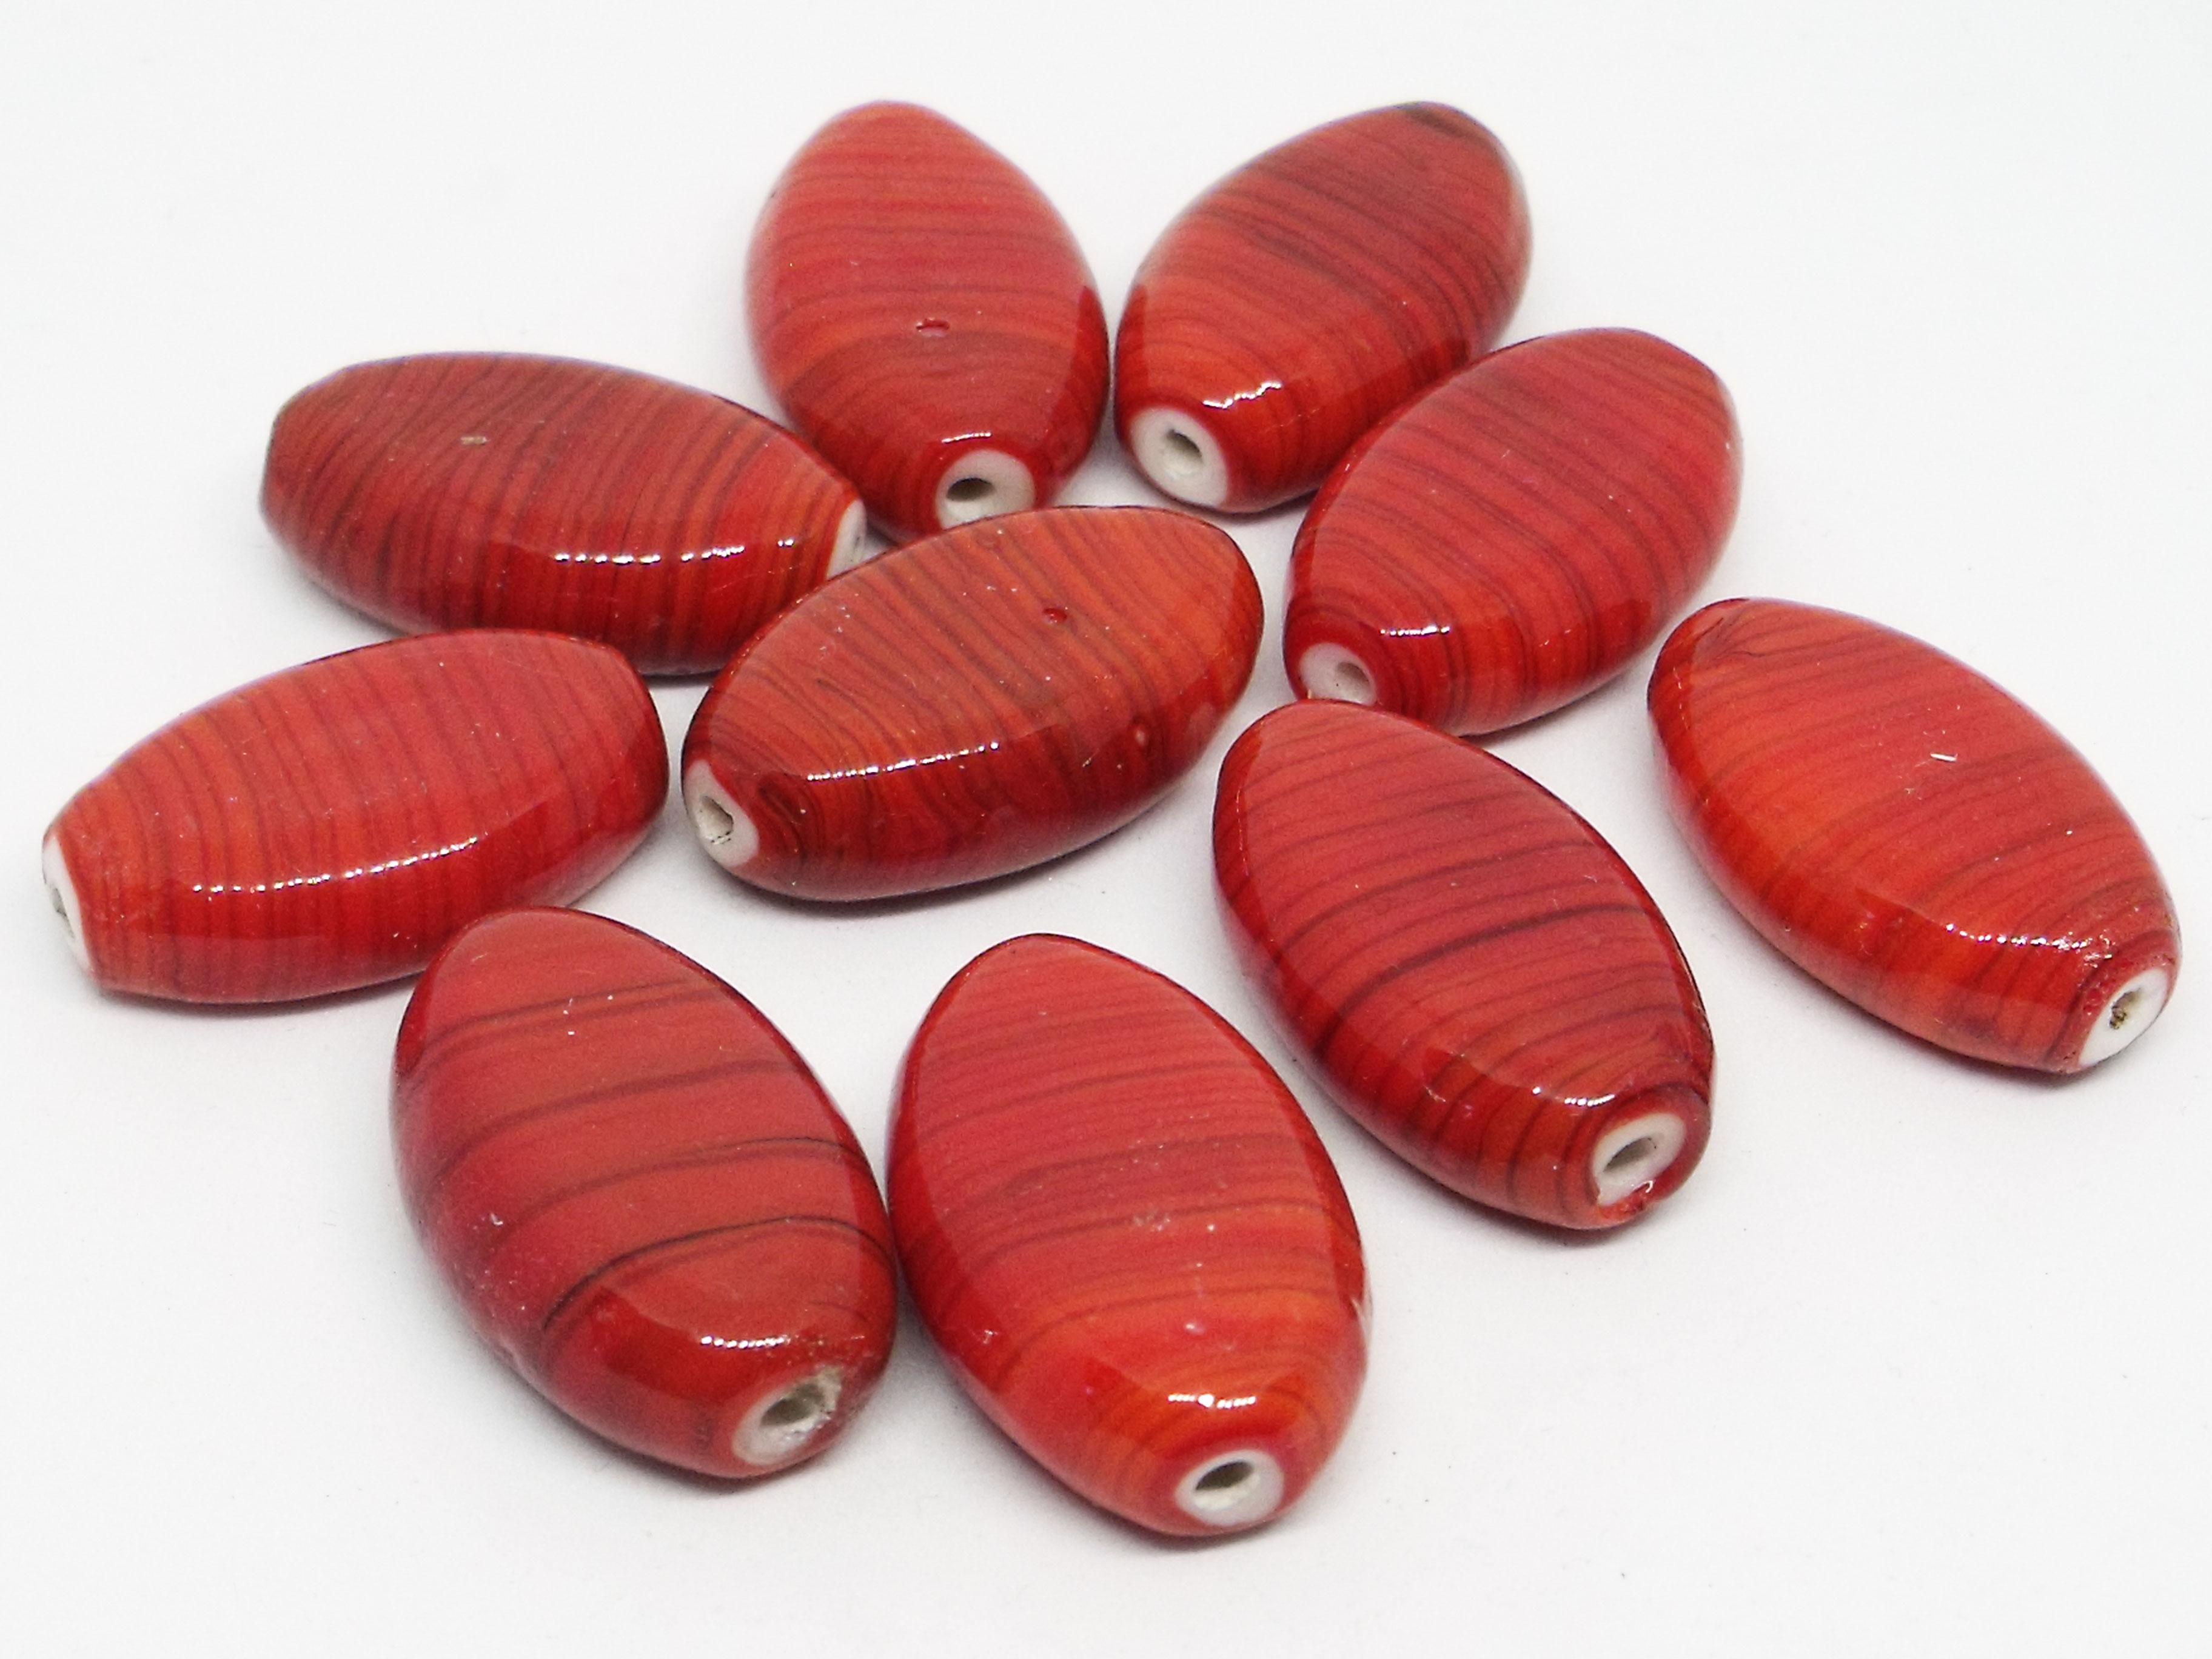 28x18mm Tapered Flat Oval Glass Bead - White Base with Red and Black Stripes